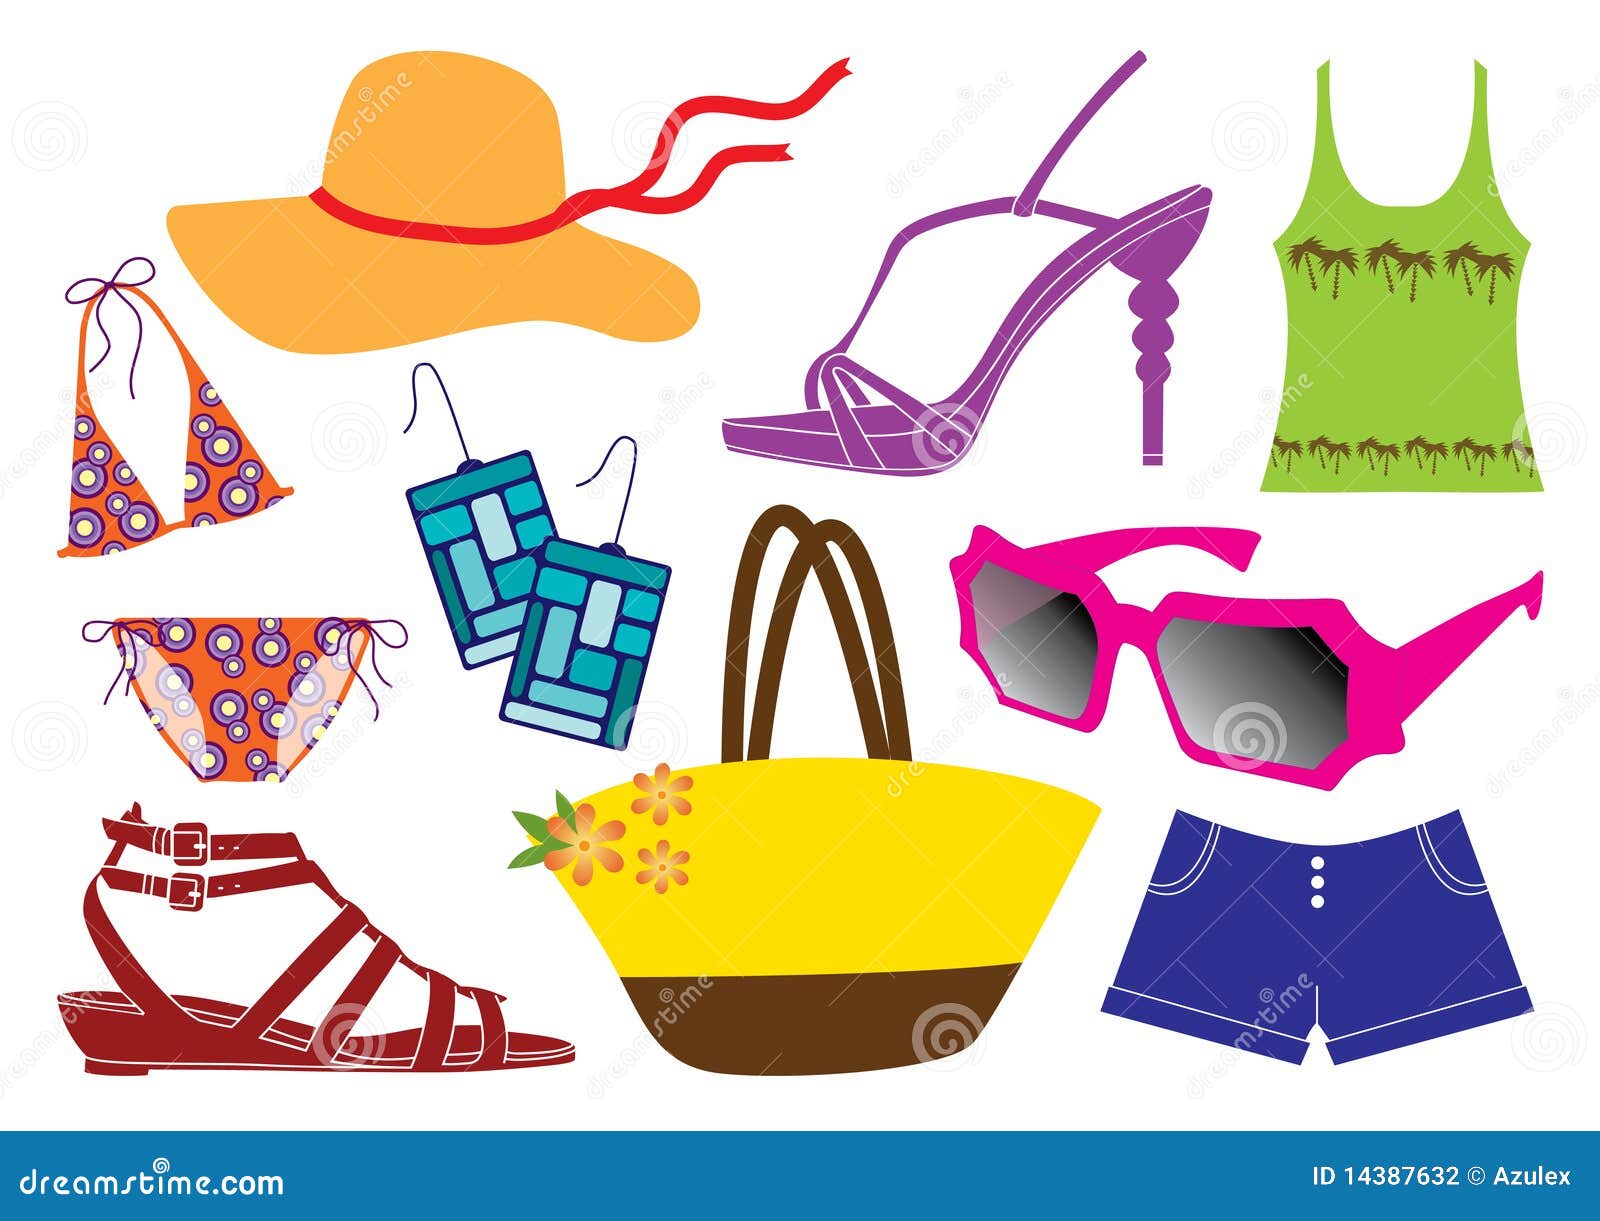 clothes worksheet clipart - photo #31